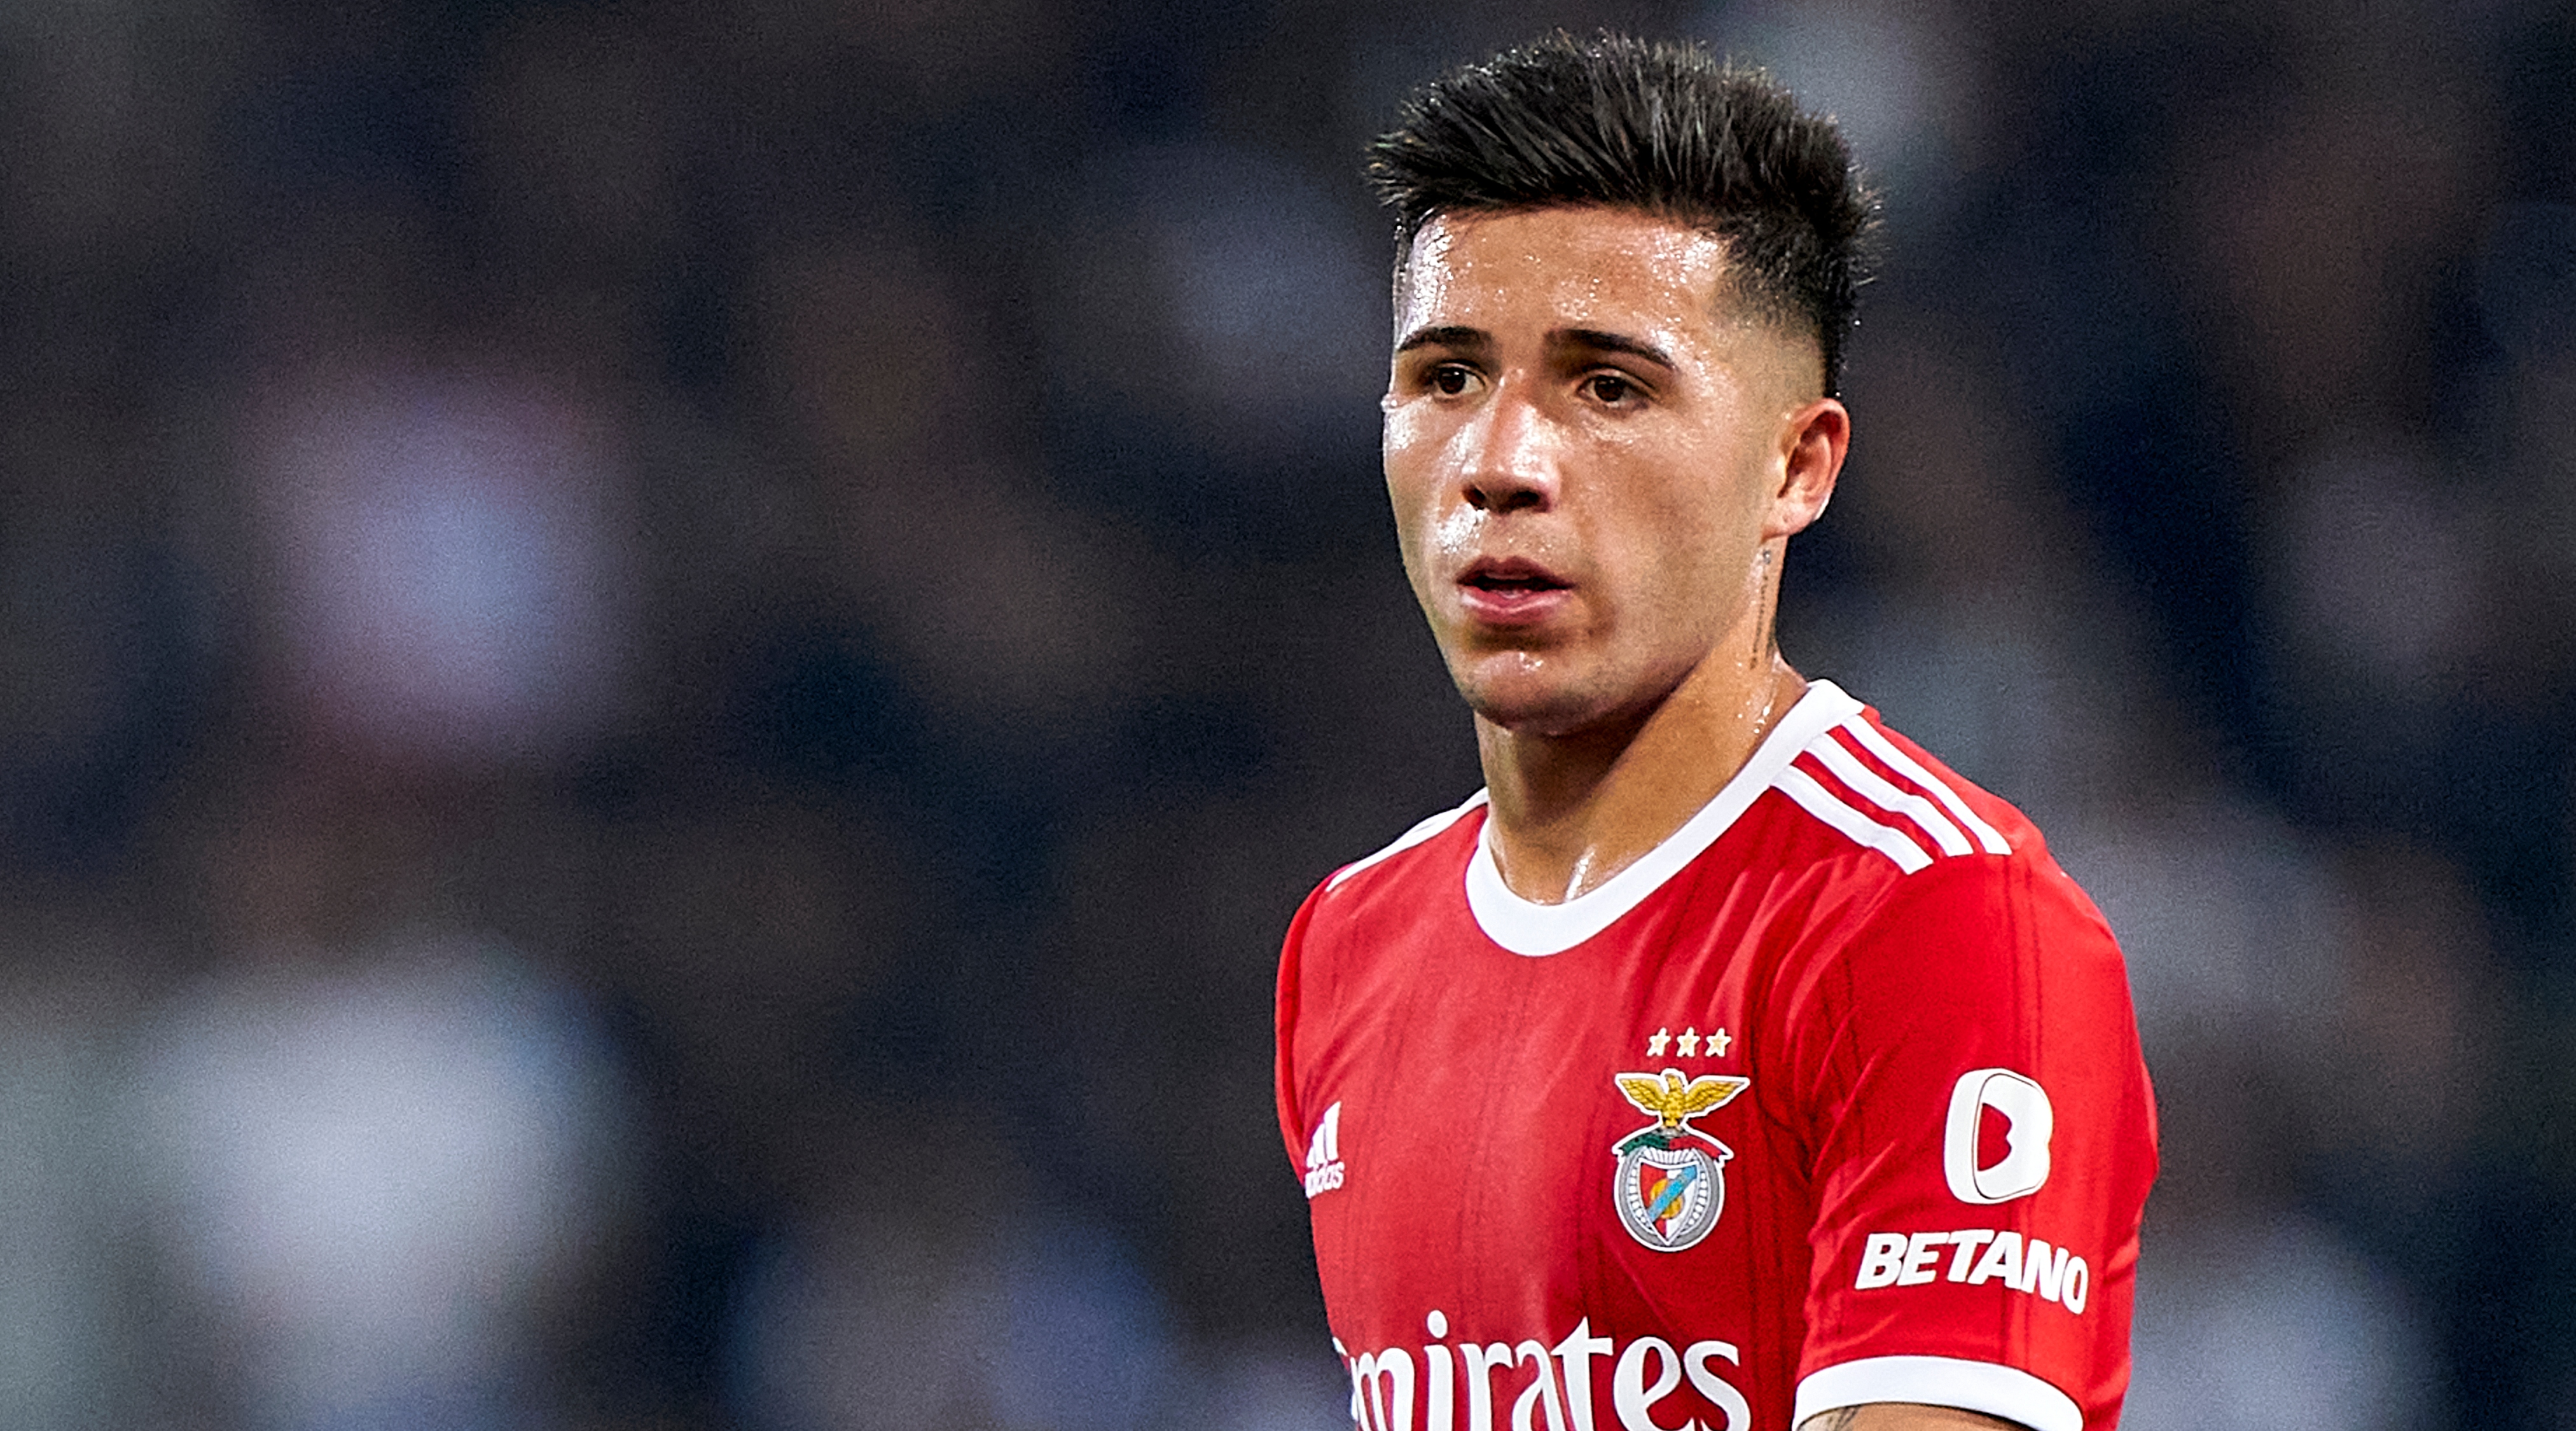 Enzo Fernandez of Benfica during the Primeira Liga match between Vitoria Guimaraes and Benfica on 1 October, 2022 at the Estadio Dom Afonso Henriques in Guimaraes, Portugal